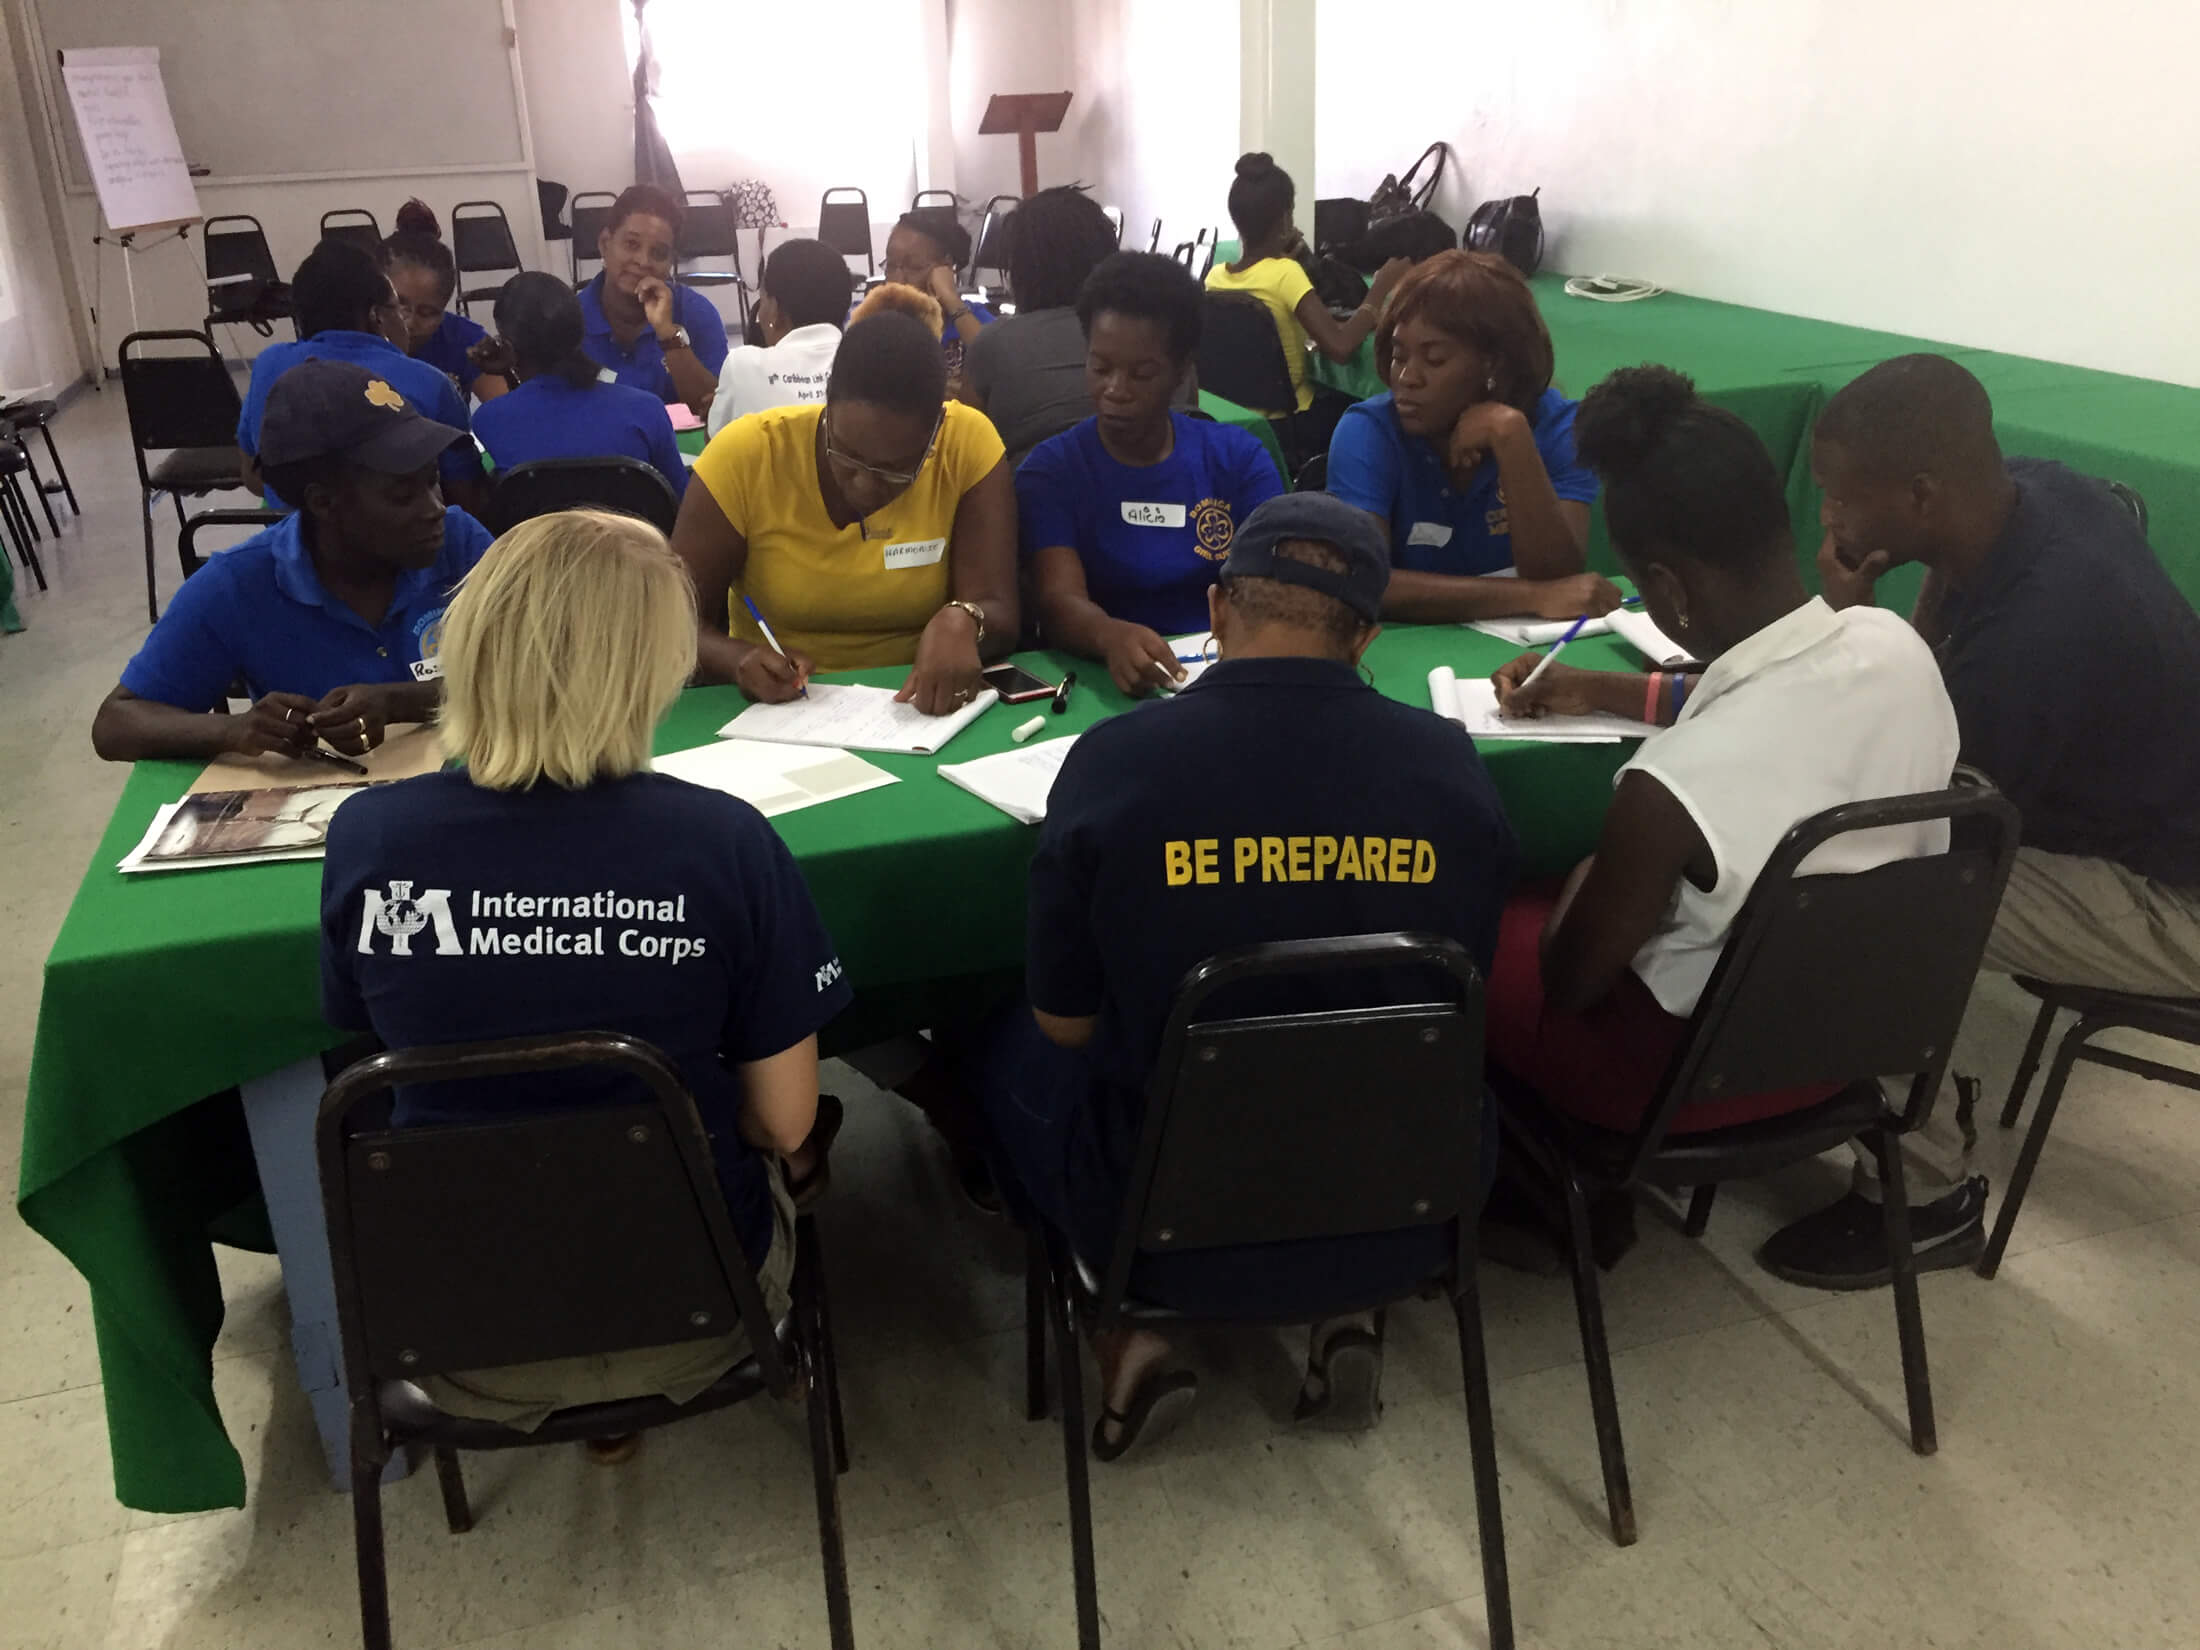 International Medical Corps’ staff train local community members in Dominica to perform psychological first aid. Such training sessions—in this case, delivered shortly after Hurricane Maria—help communities better prepare for future storms.